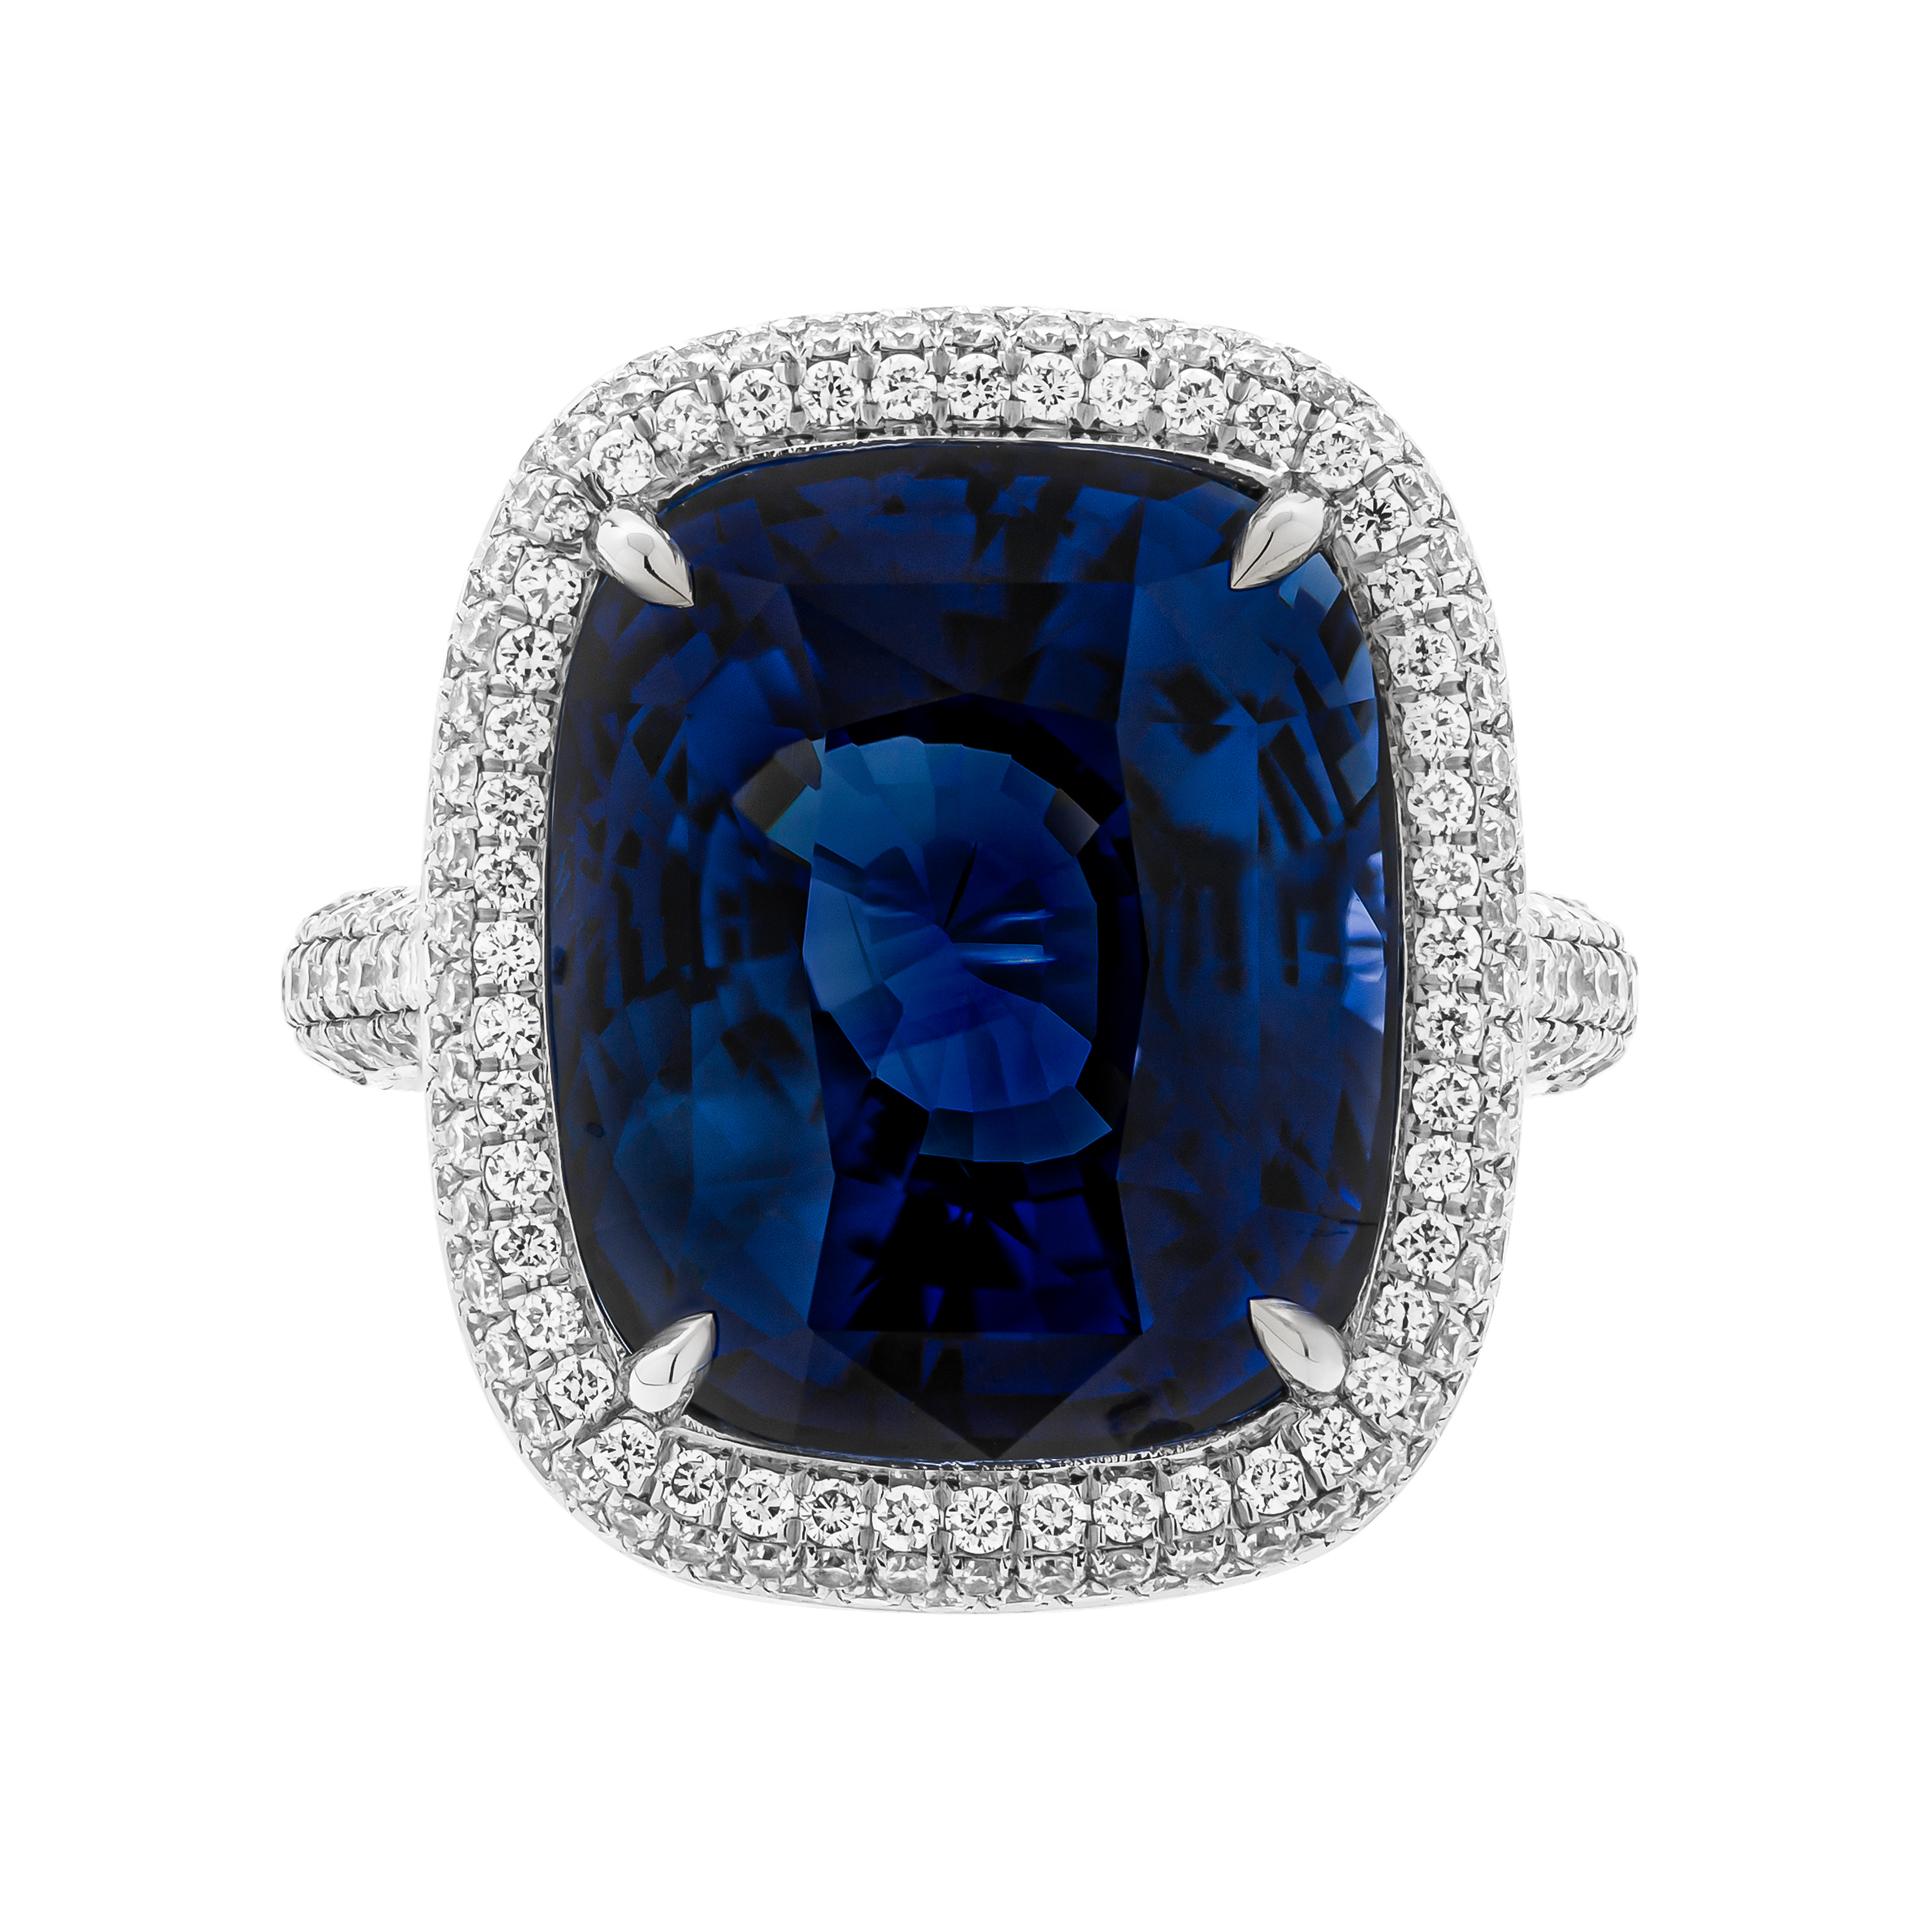 Cocktail ring in Platinum with 16.16ct Blue Sapphire
Mounted in handmade pave setting with 404 white diamonds F/G color & VS clarity , totaling 1.62ct 
Center stone: 16.16ct Cushion Blue Sapphire GIA#6224183773
Size: 6.5 

Comes with GIA, appraisal